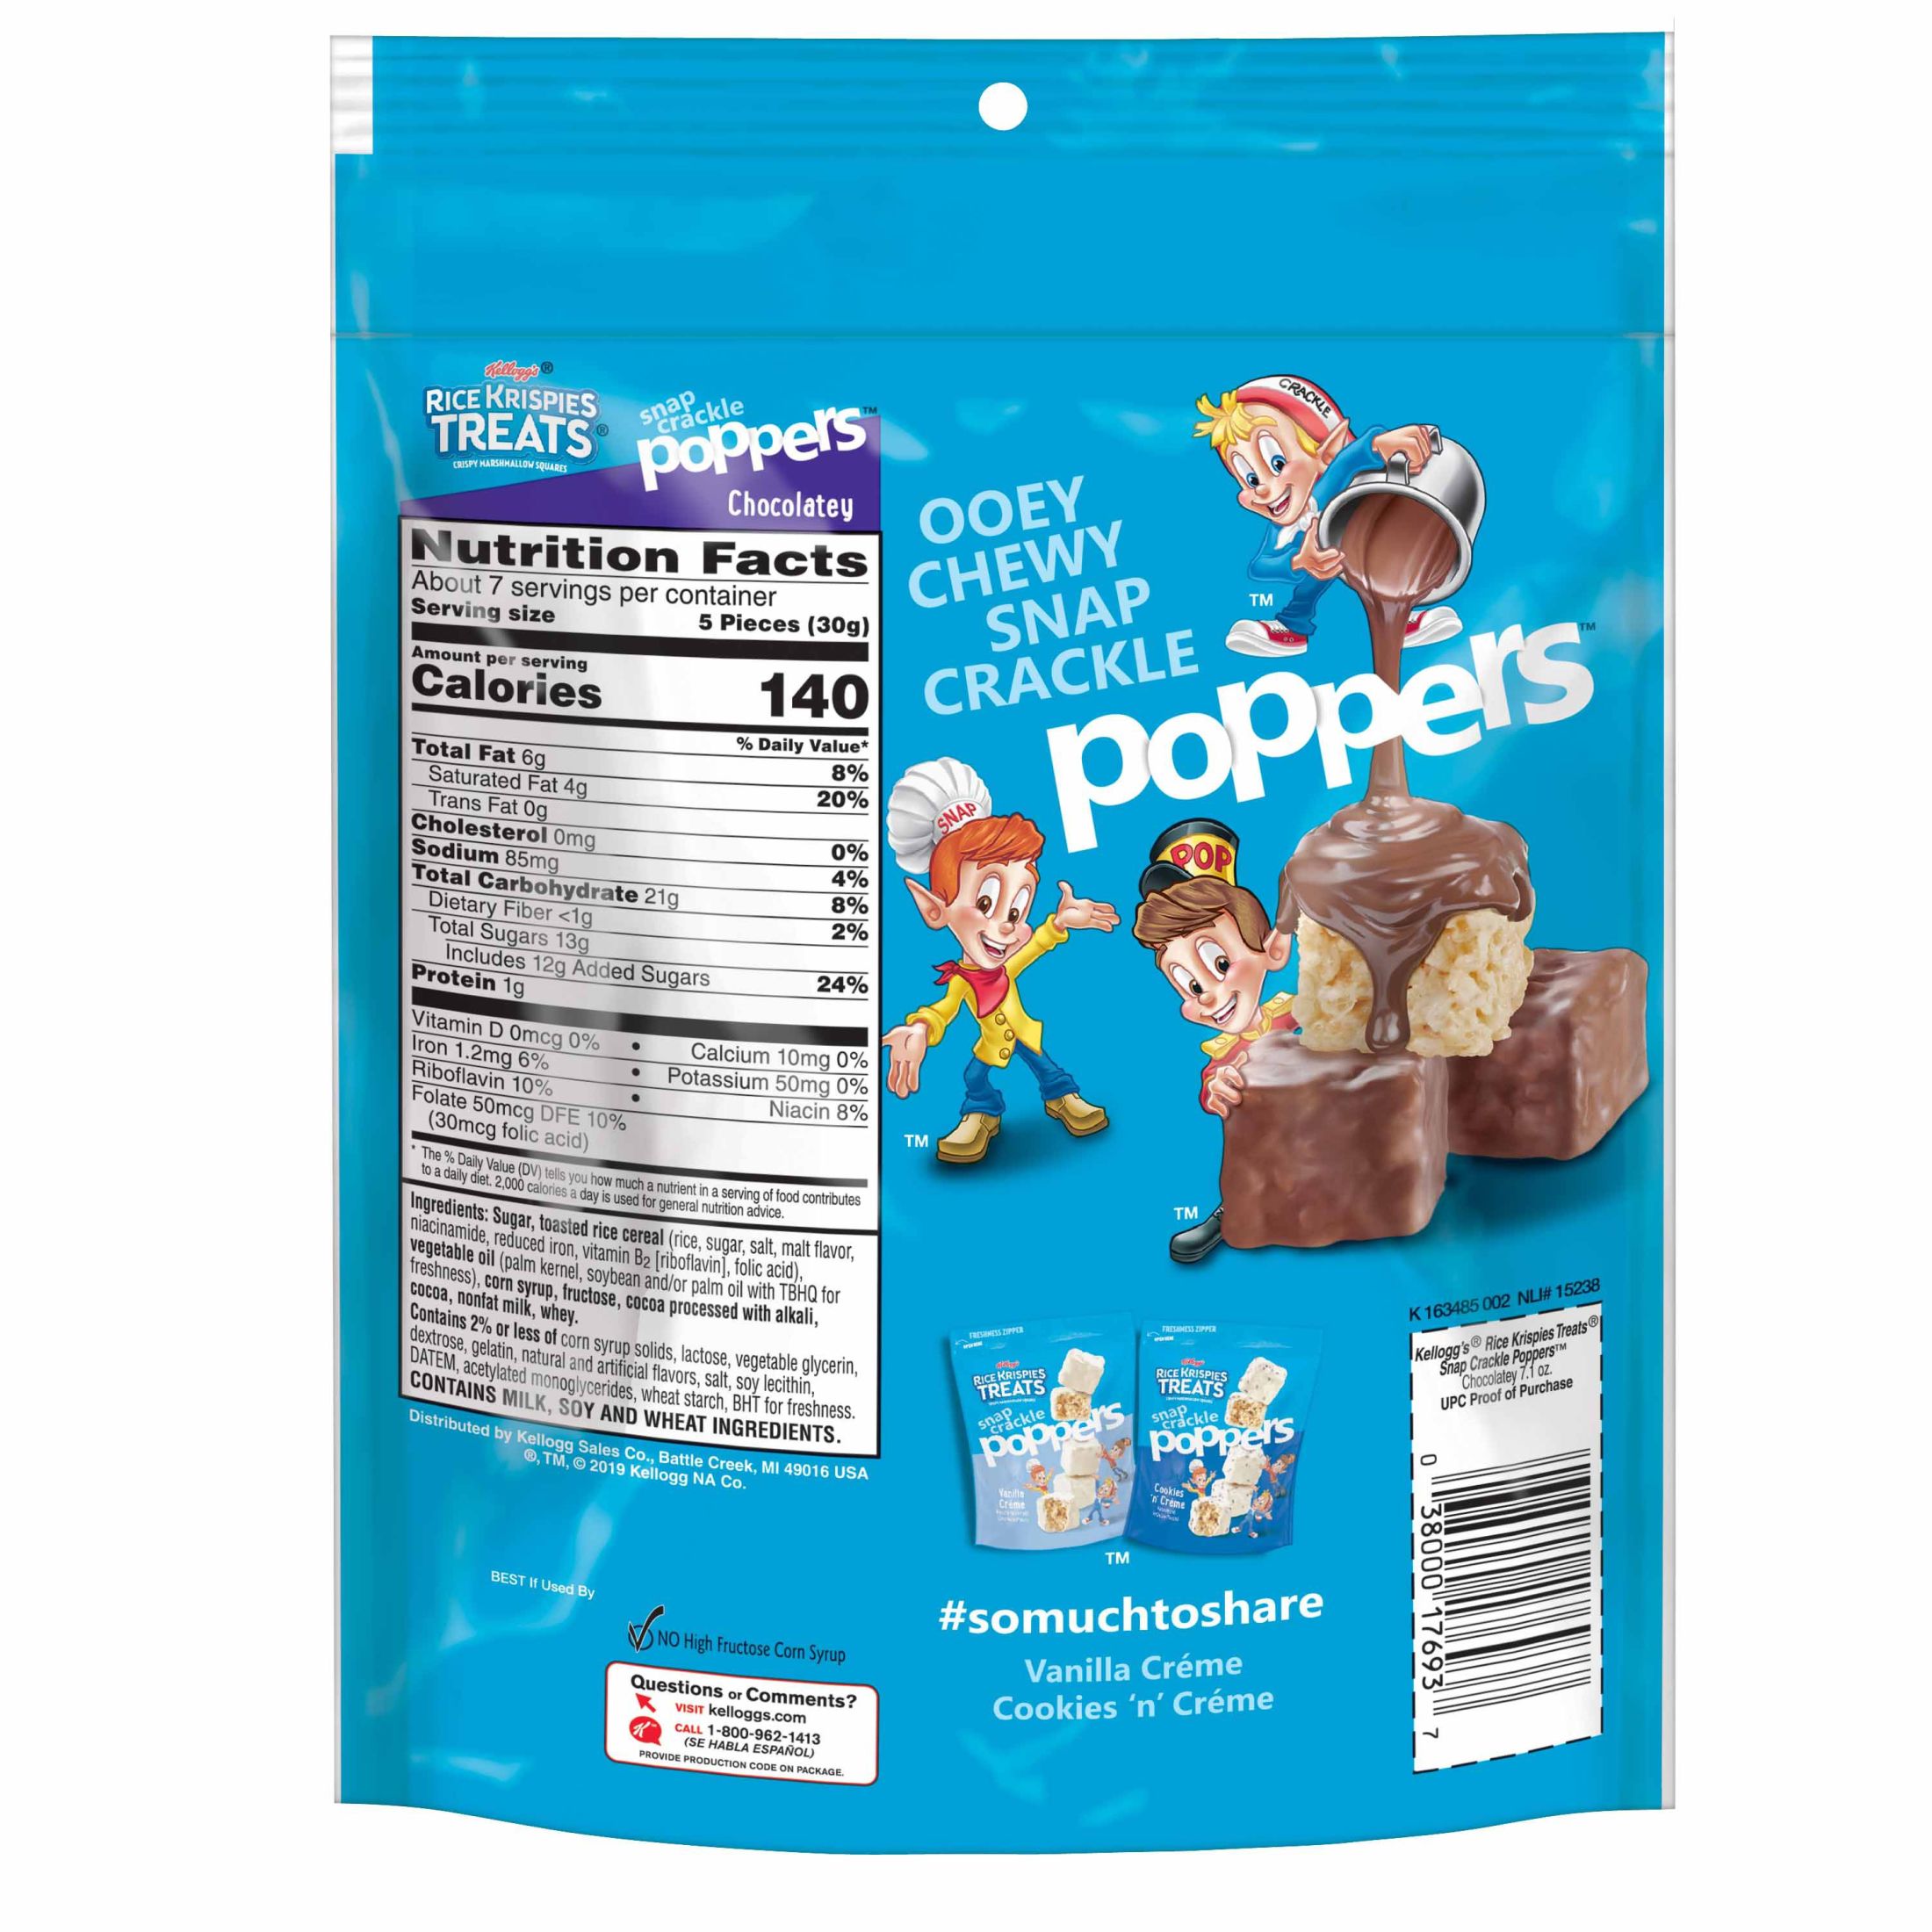 Rice Krispies Treats Poppers Chocolatey Chewy Crispy Marshmallow Squares, 7.1 oz - image 6 of 8